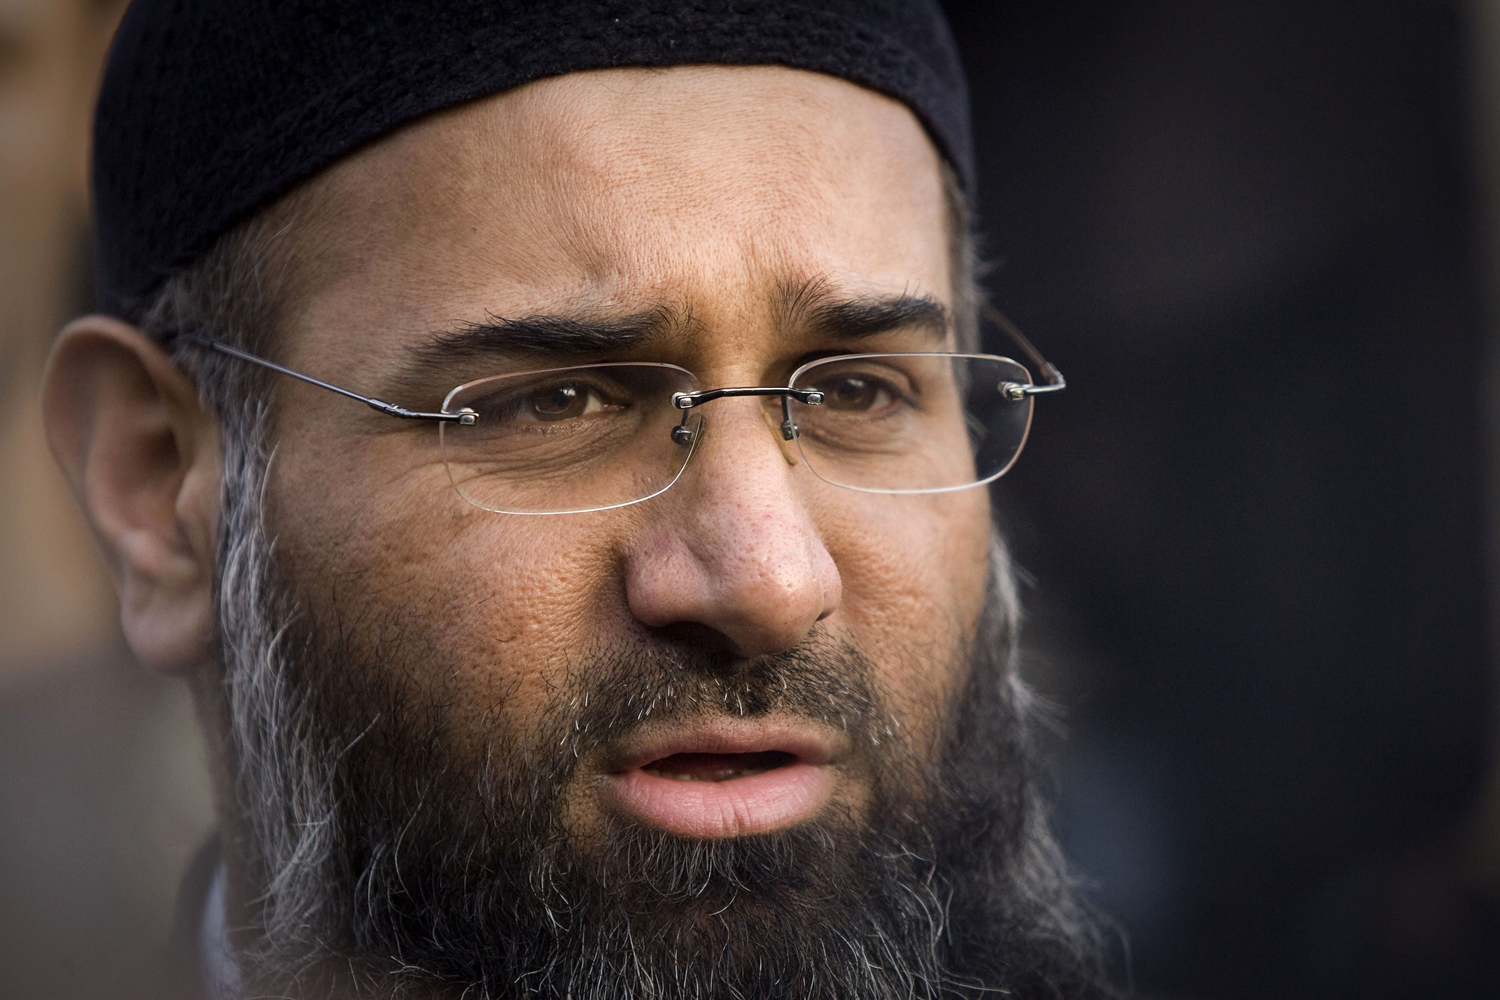 File photograph shows Muslim preacher Choudary addressing members of the media during a protest supporting Shari'ah Law in north London